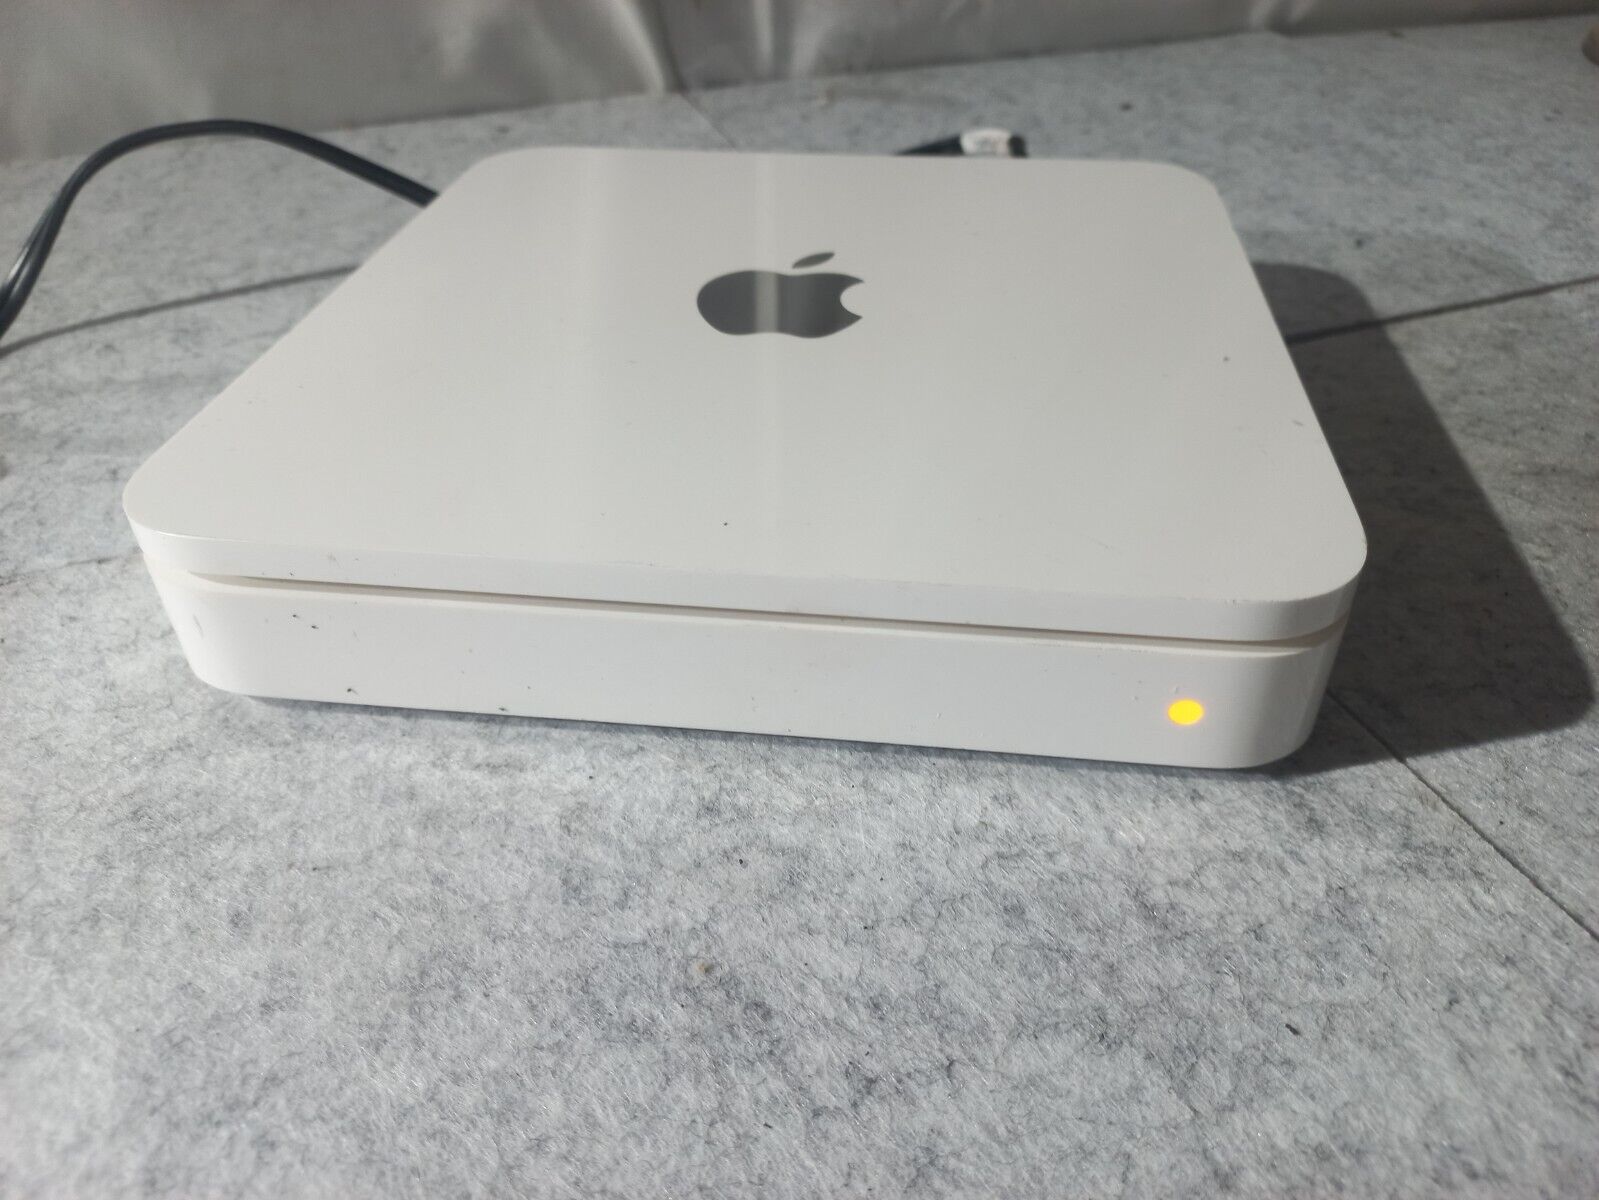 Apple Time Capsule WiFi router 1 TB A1254 First Generation - Power Cord INCLUDED